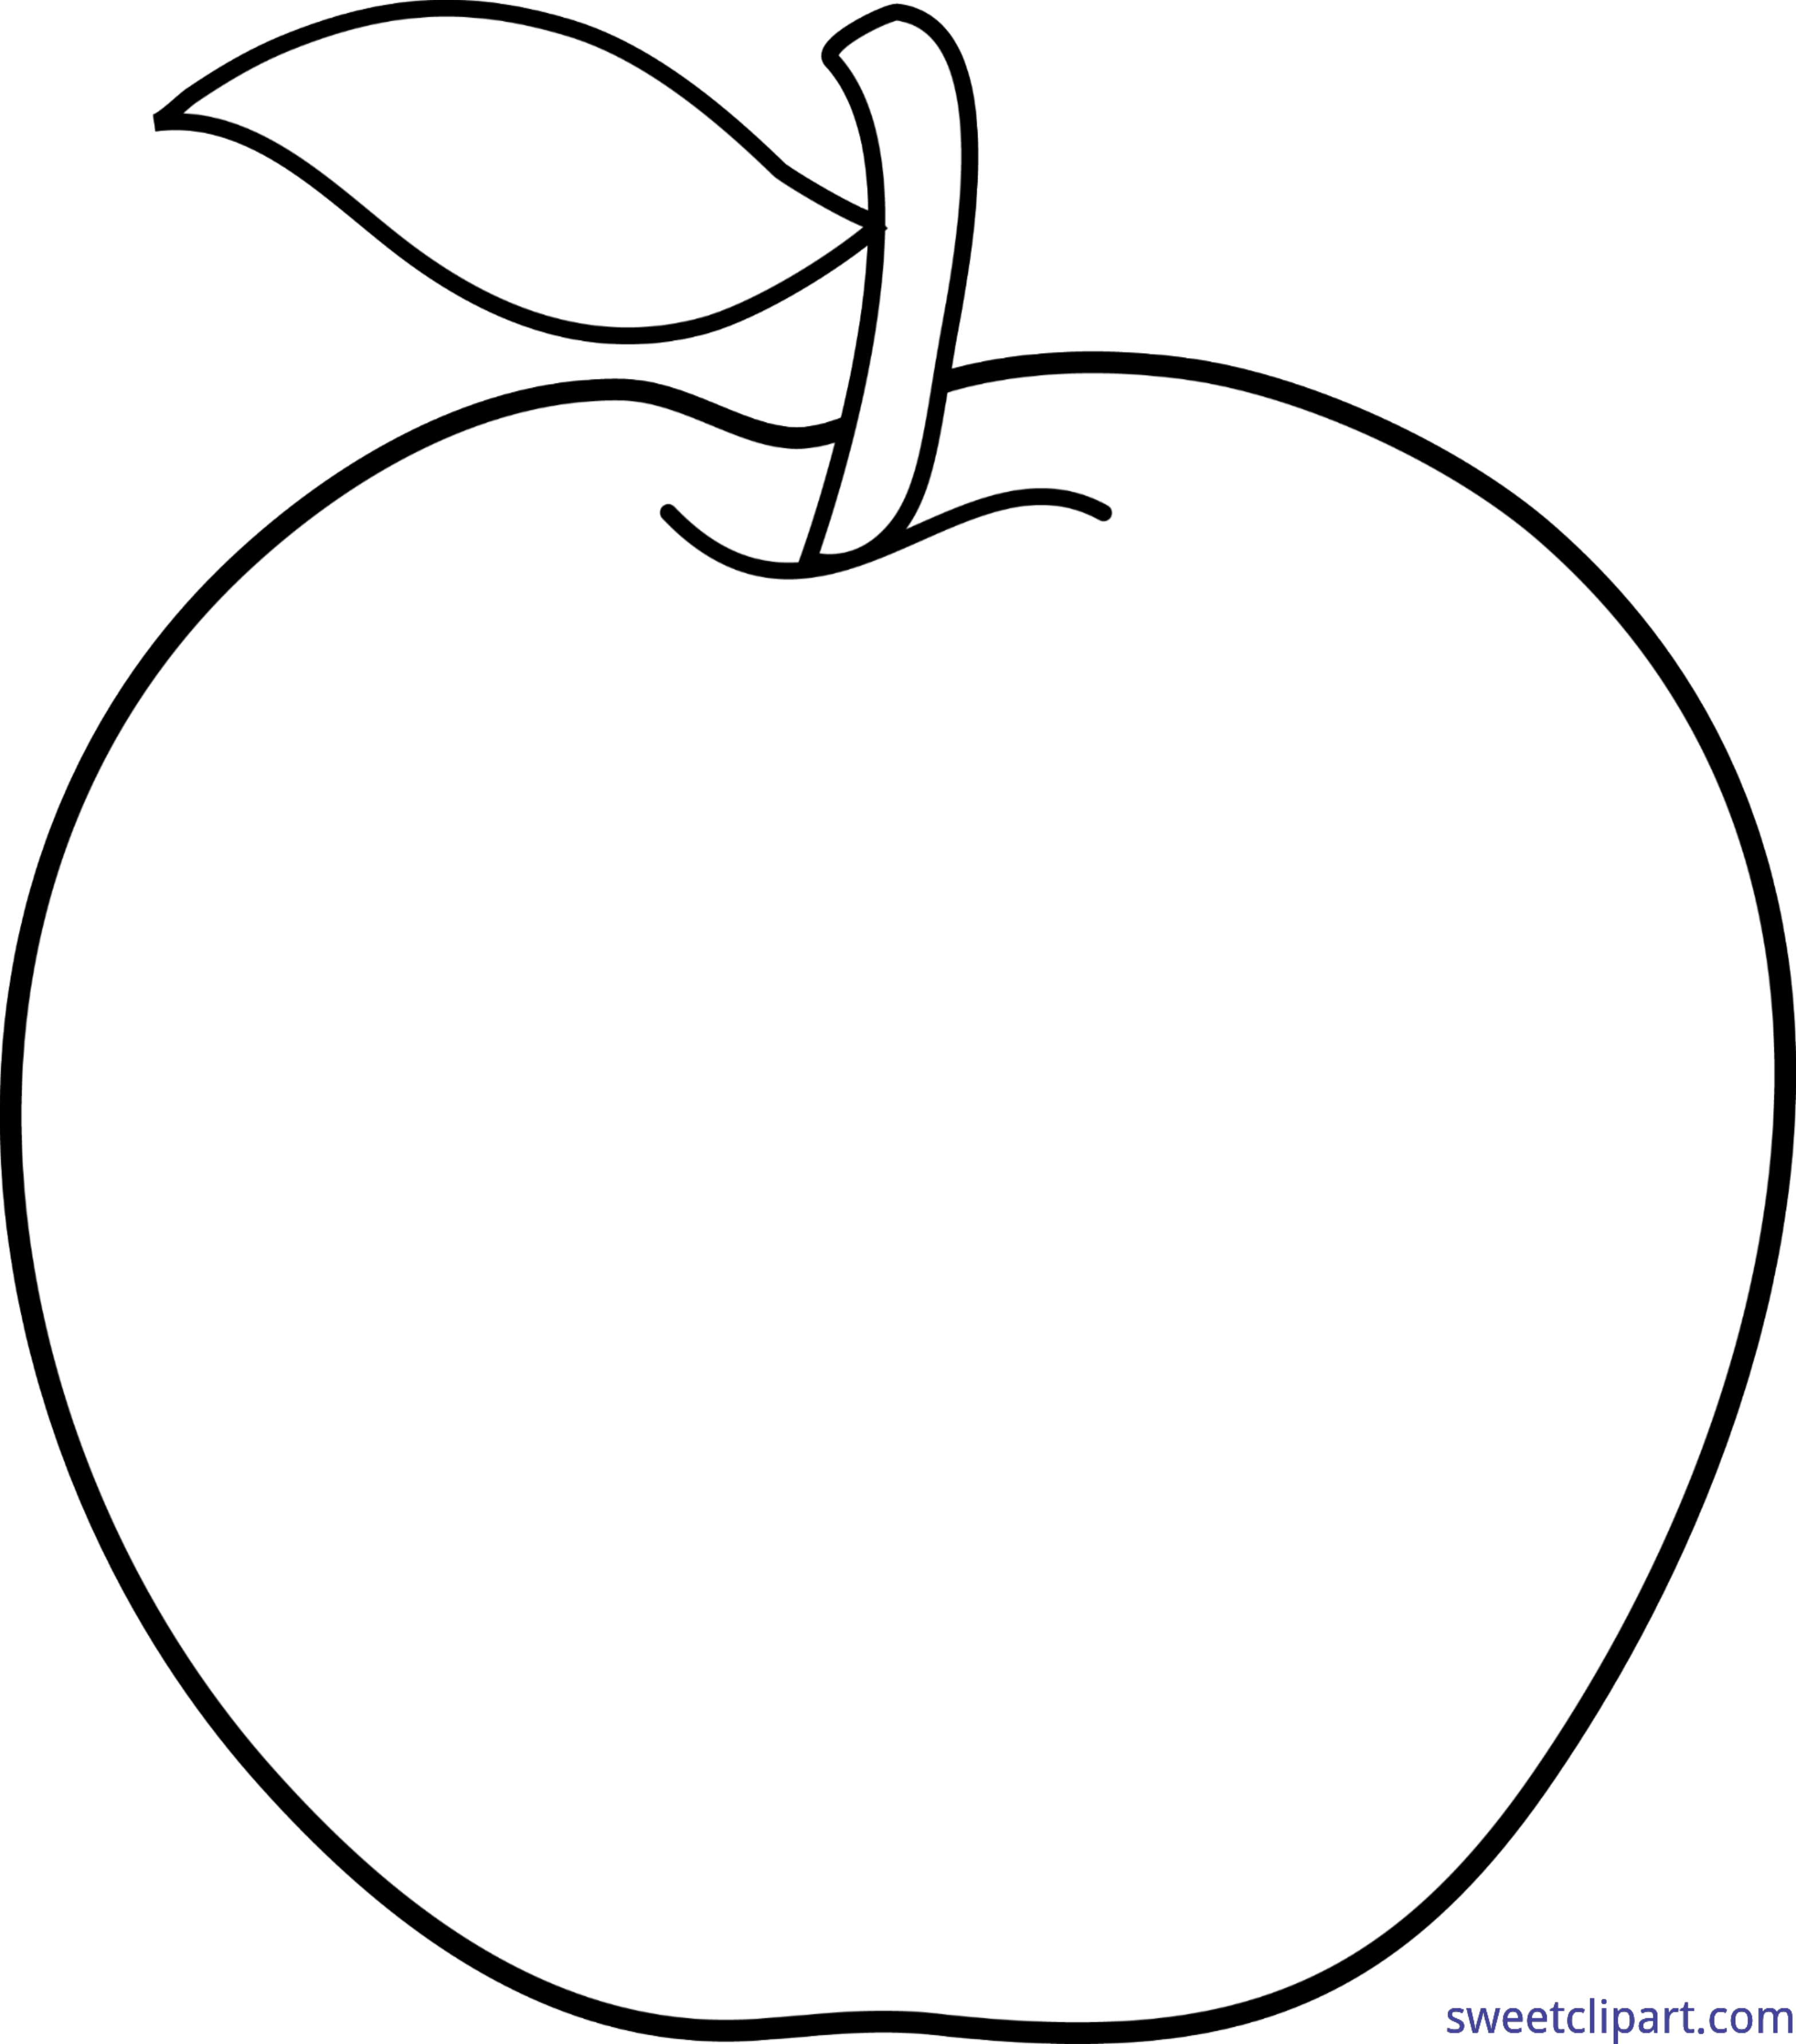 clipart apples lineart